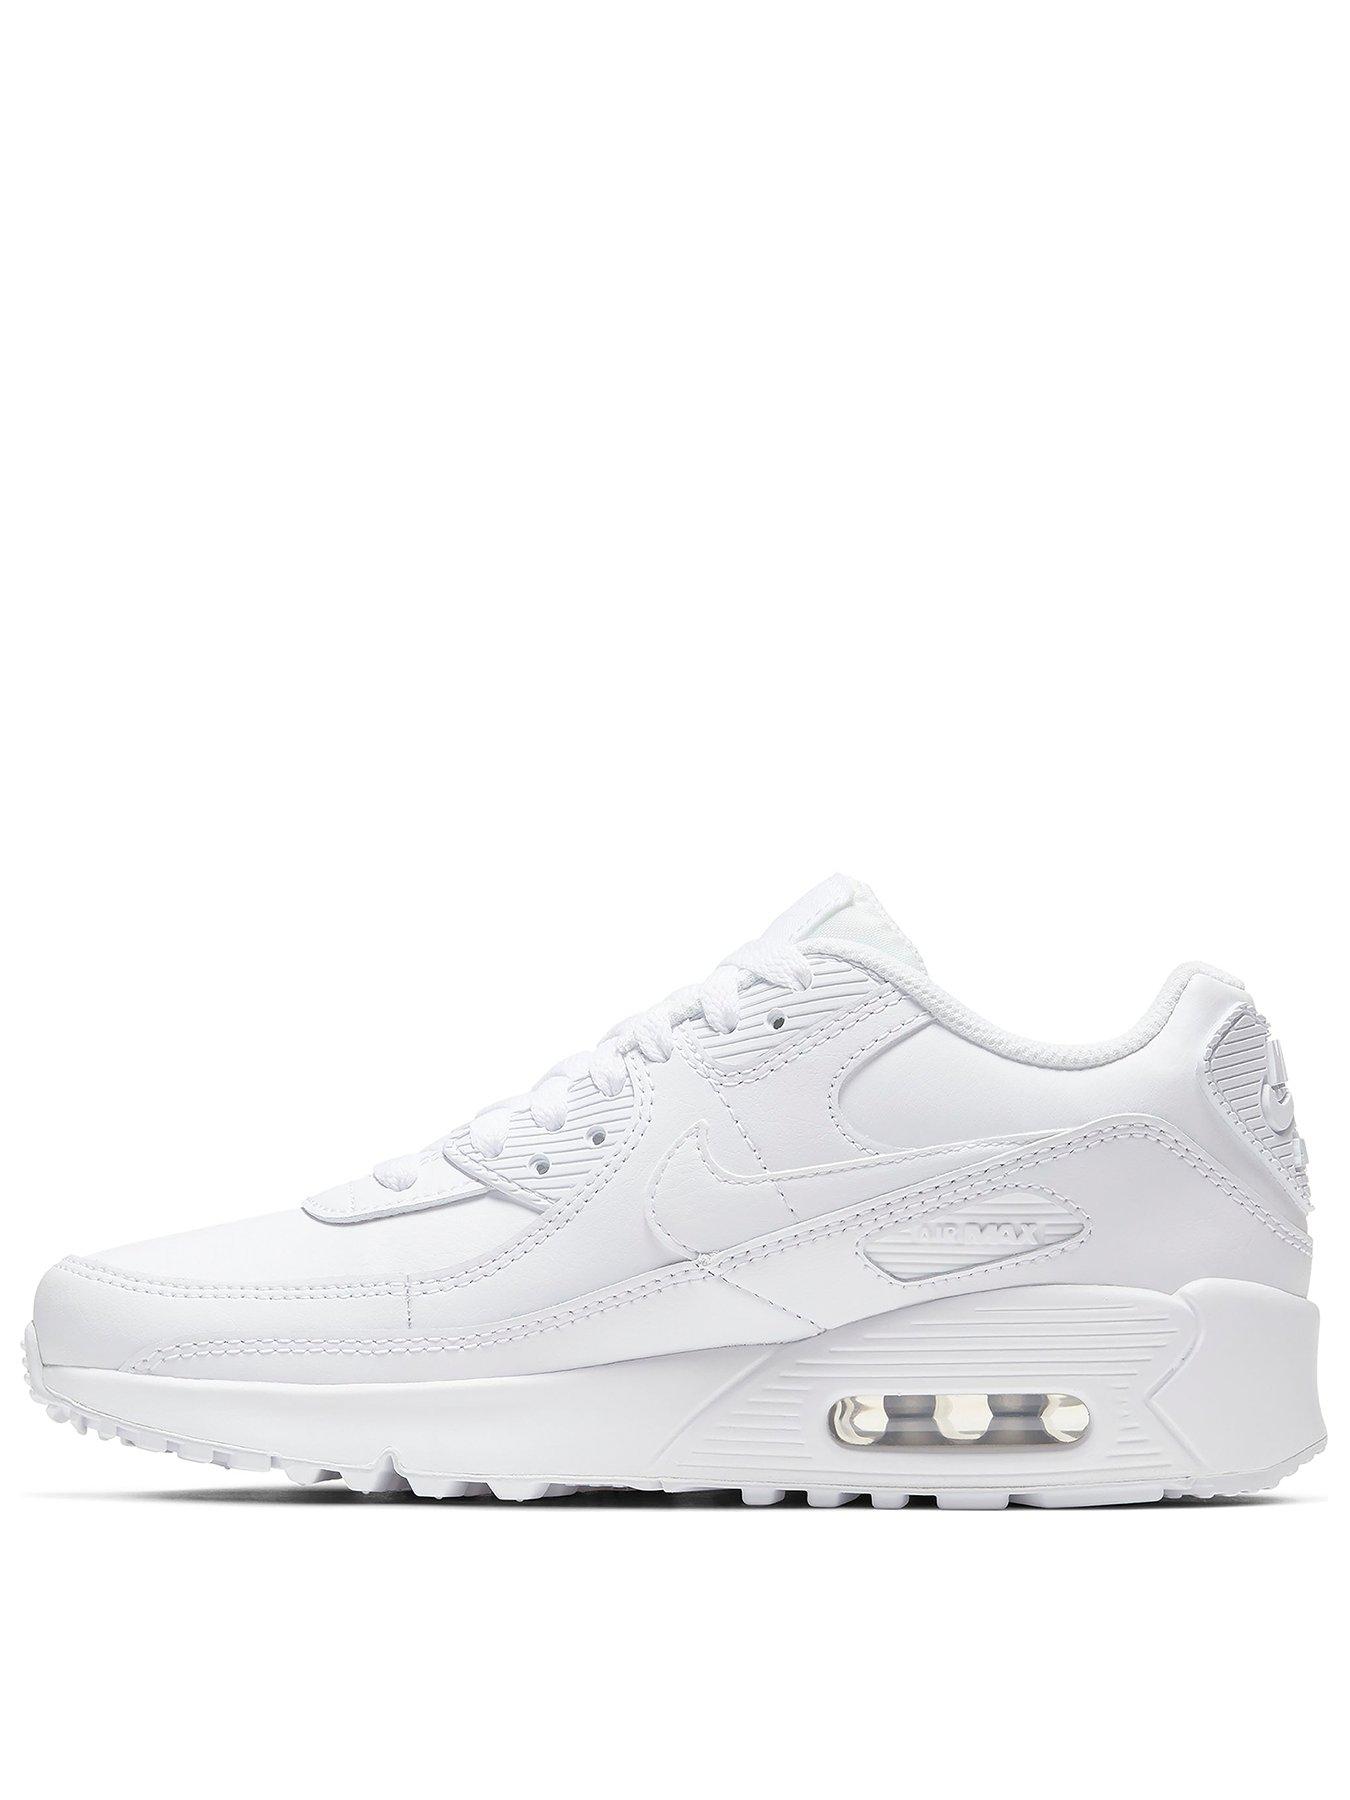 Nike Air Max 90 Leather Junior Trainers White | very.co.uk